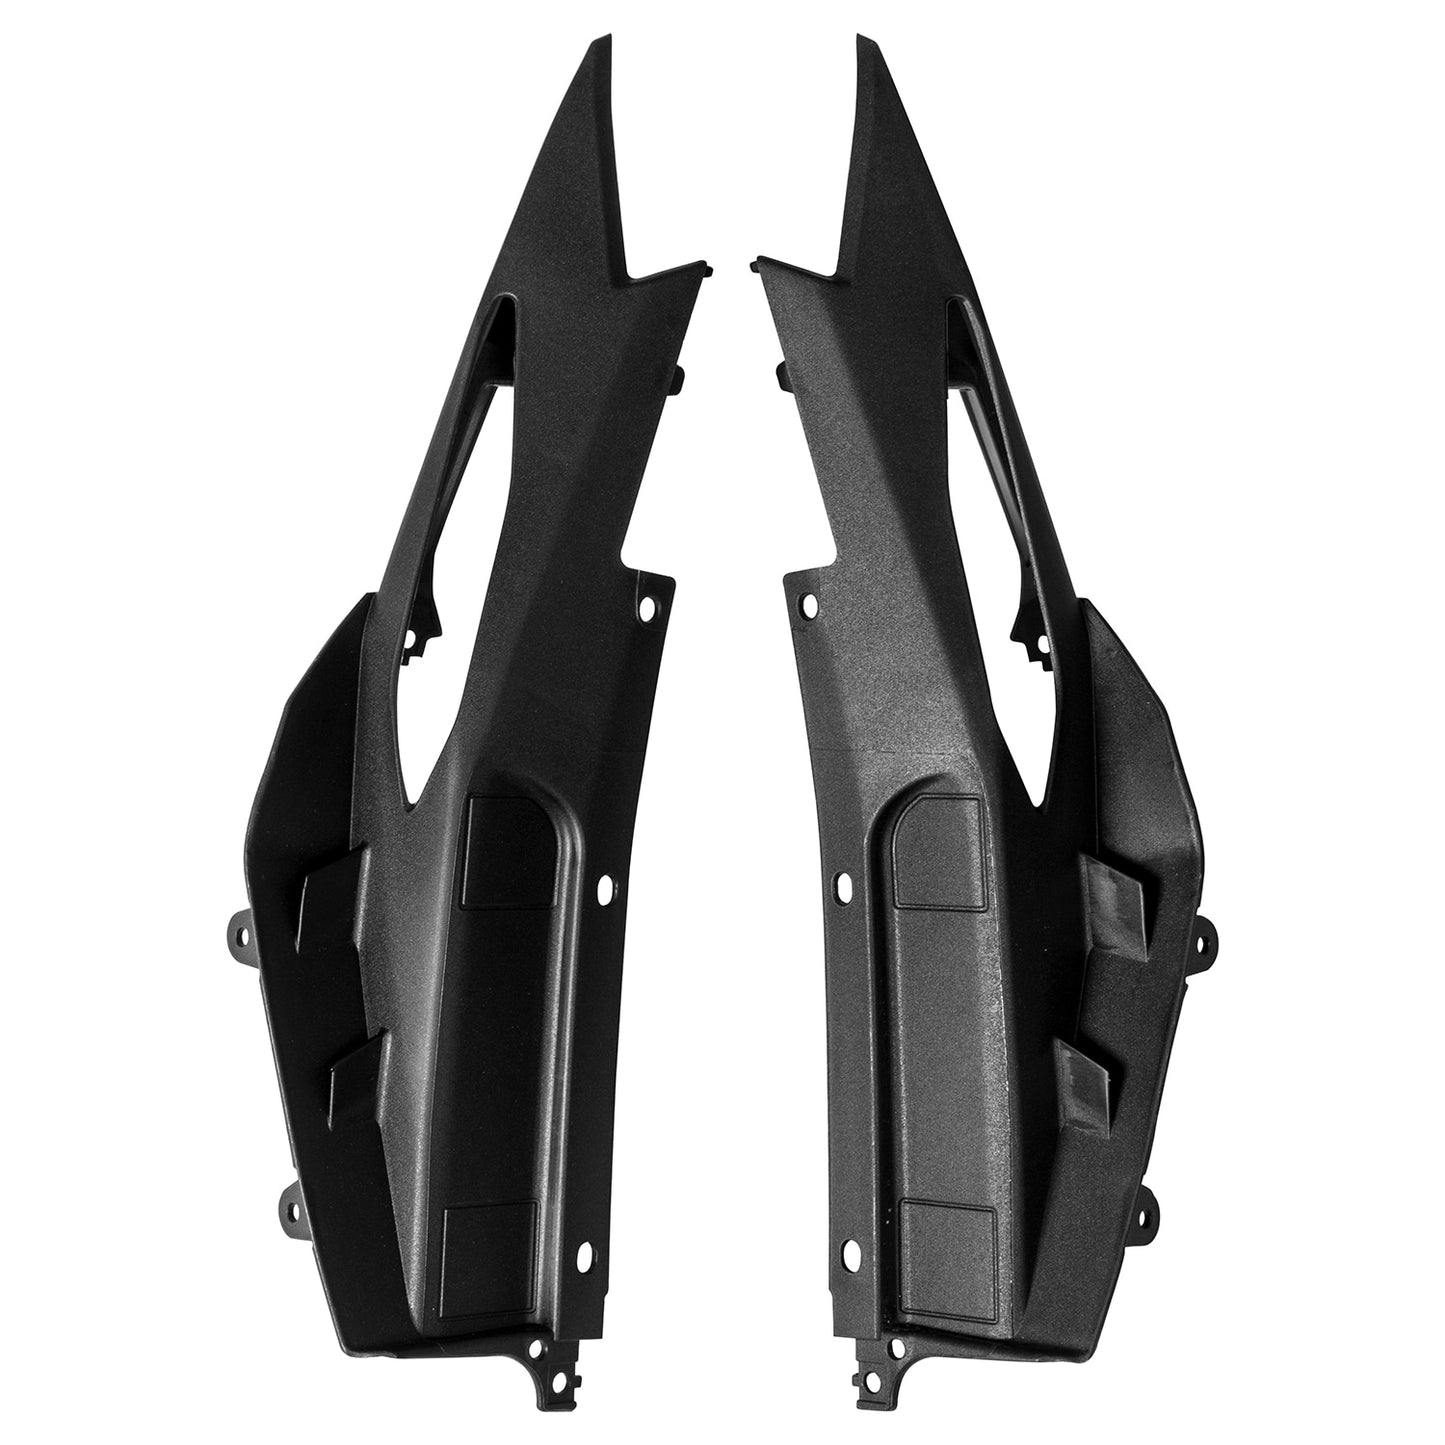 Wolfline Motorcycle Fairing Side Upper Rear Tail Seat Cover Cowl For Yamaha MT09 MT-09 MT 09 2017 2018 2019 2020 2021 Fairings Protector